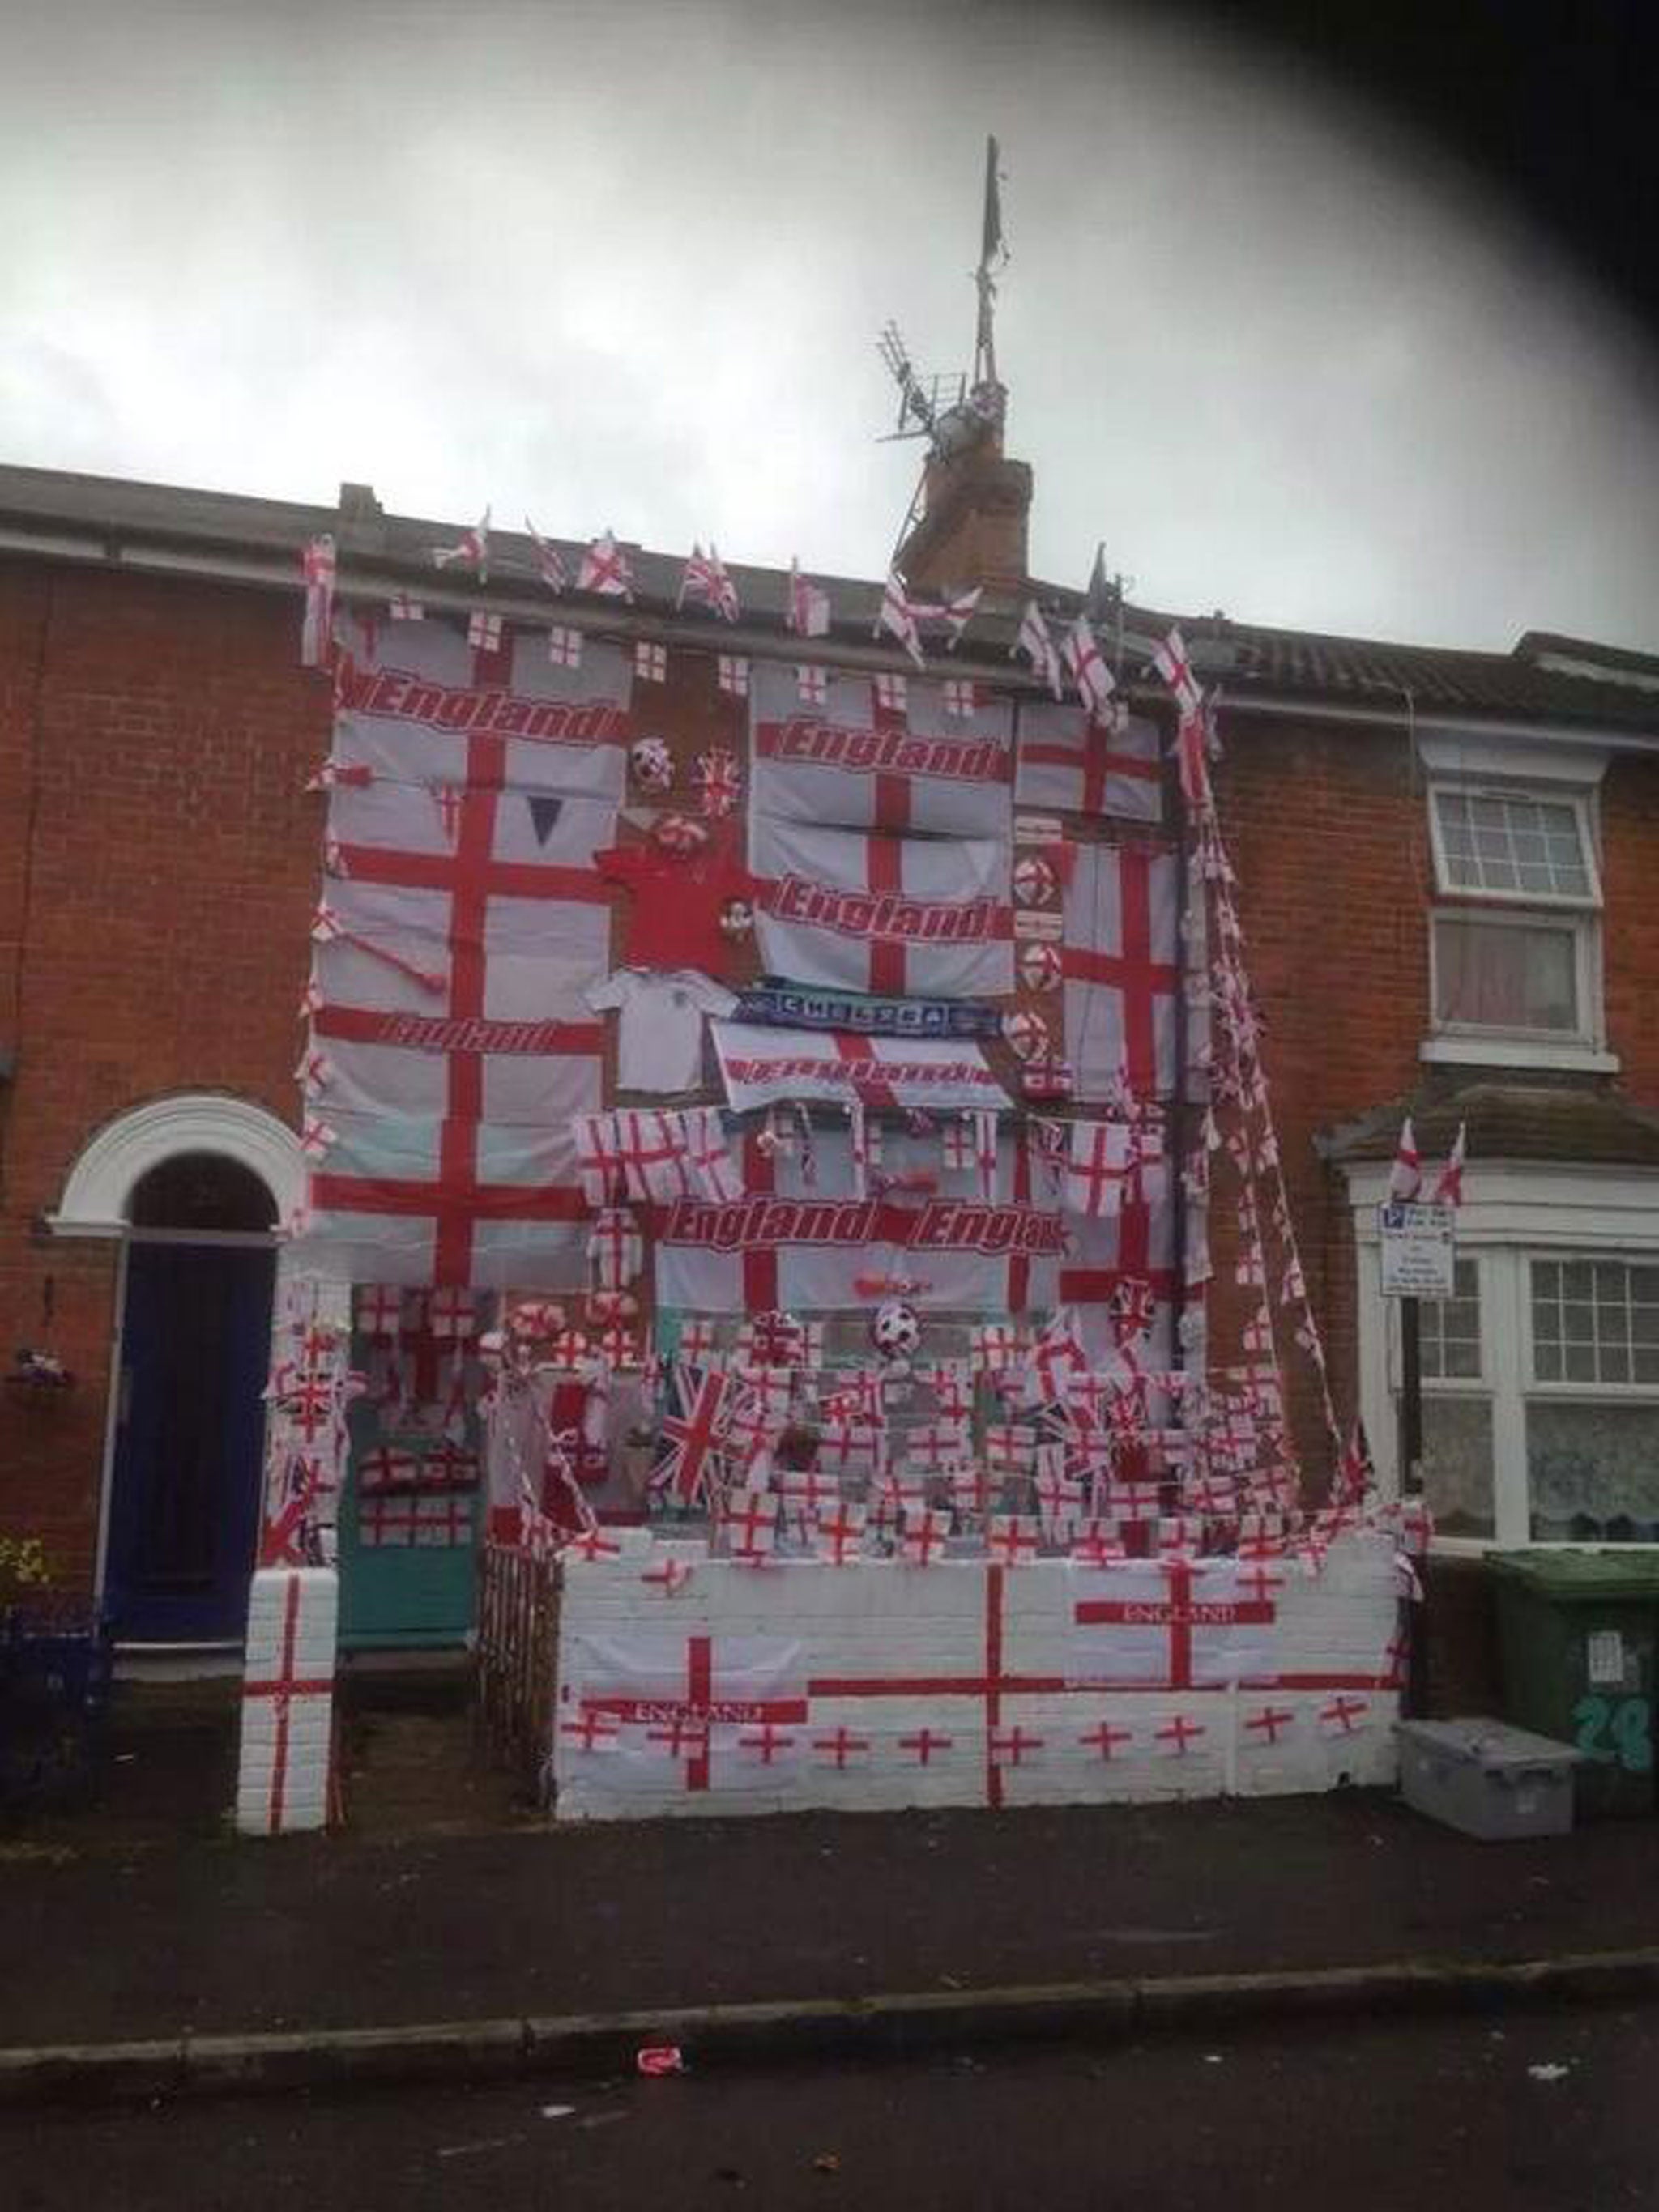 The England house in all its red and white glory